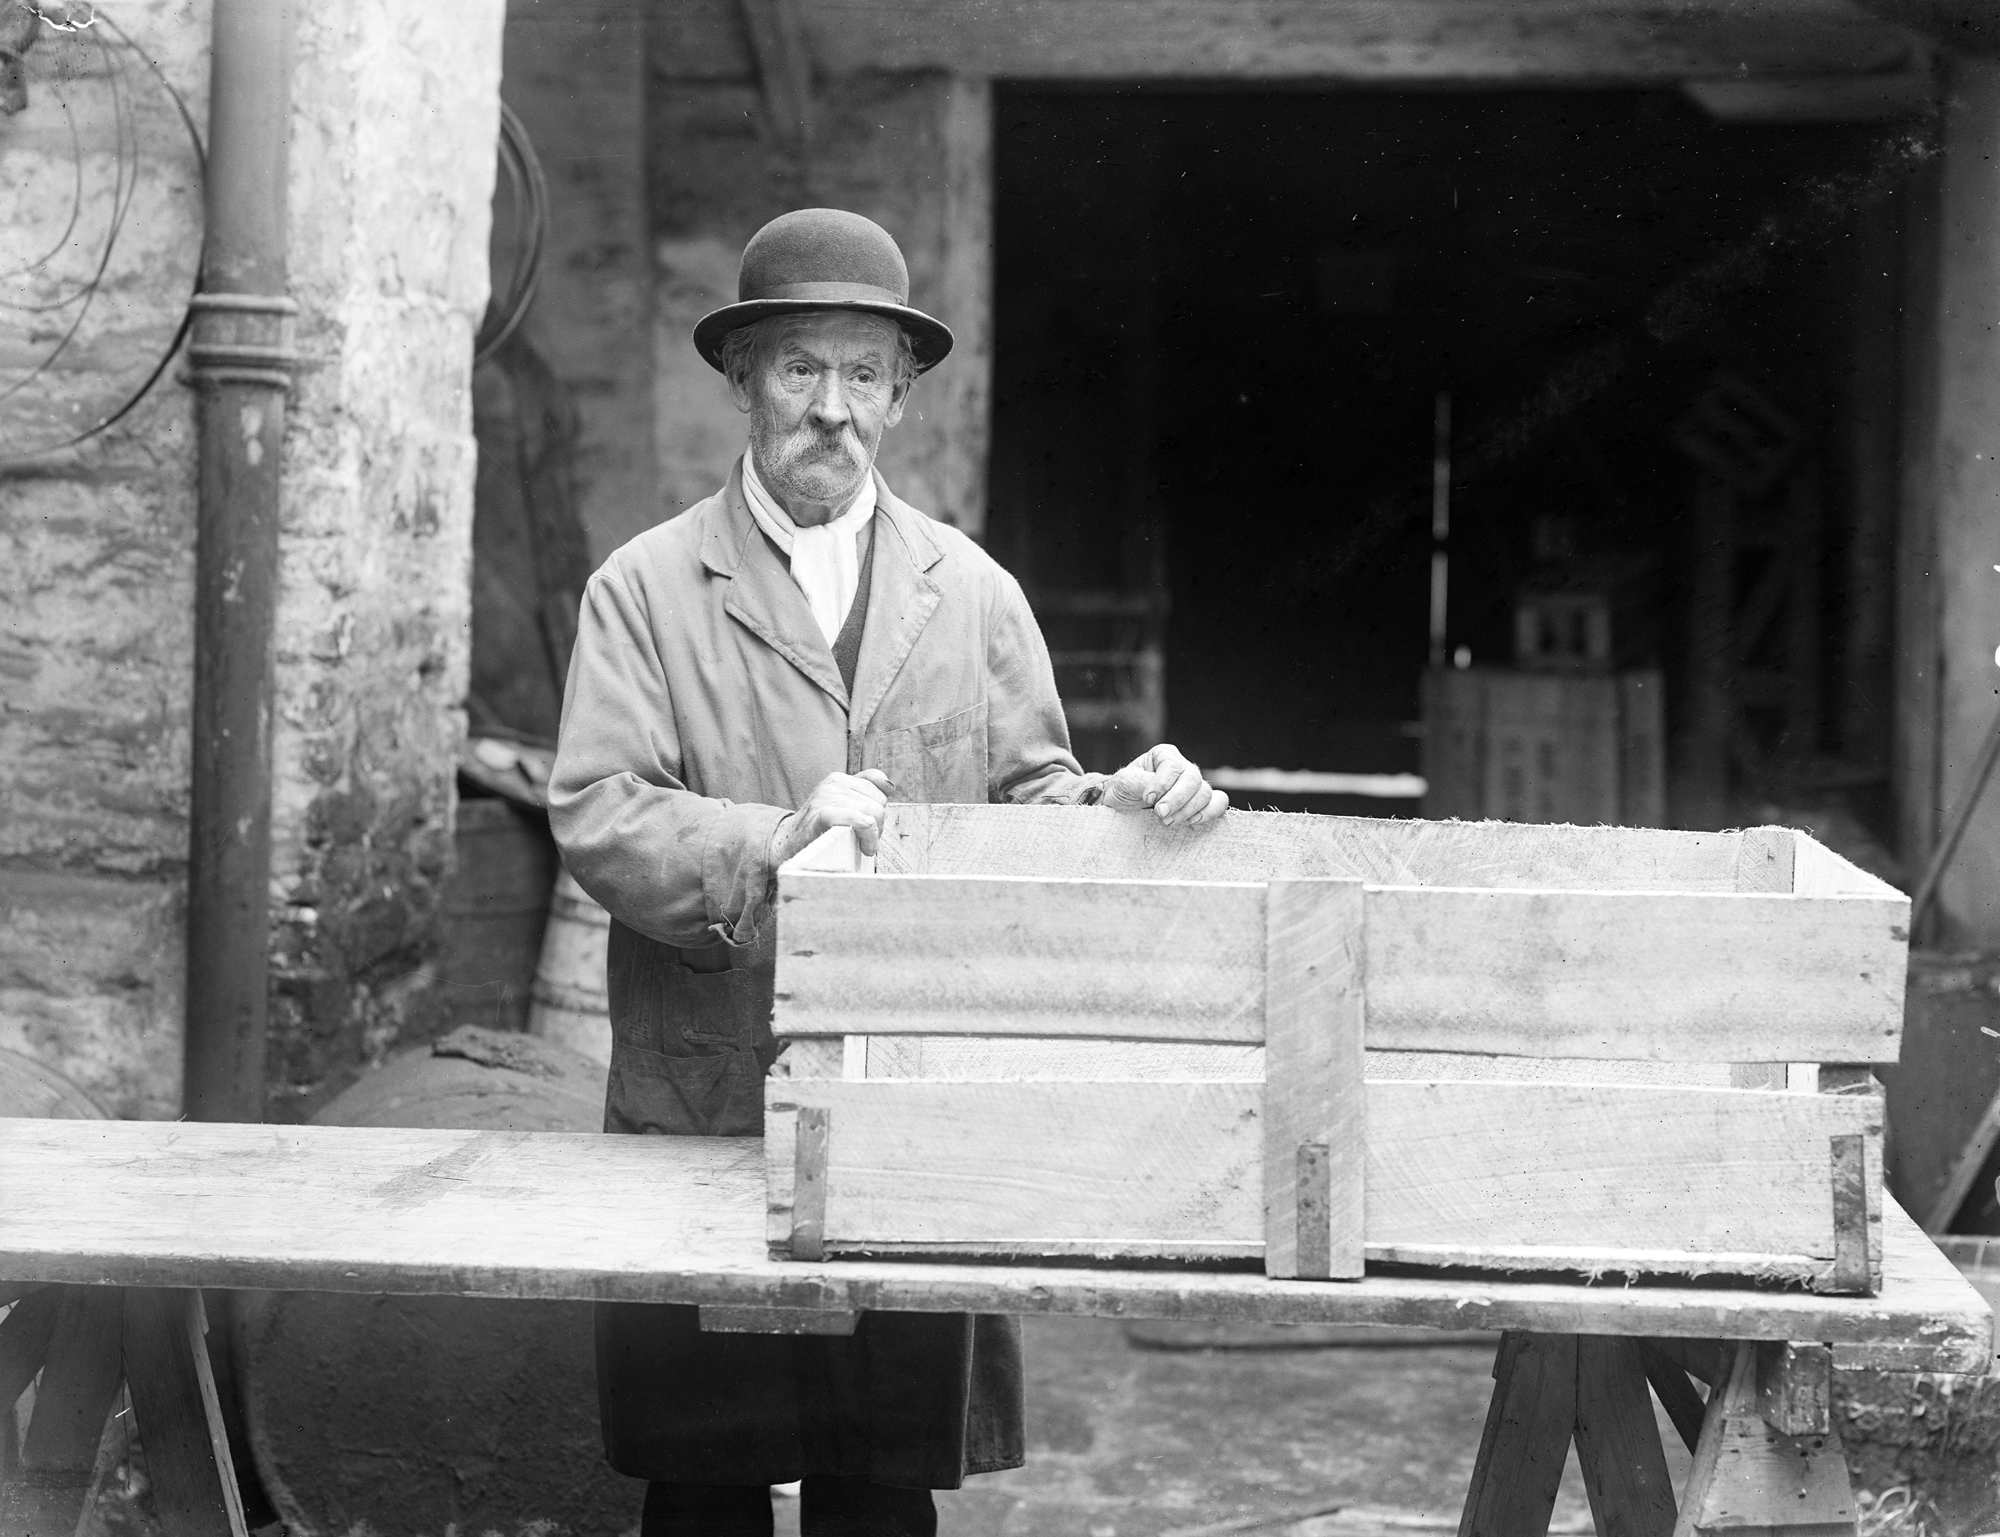 Male with hat and boxes, Waterford, Ireland 1930s (5896548007)